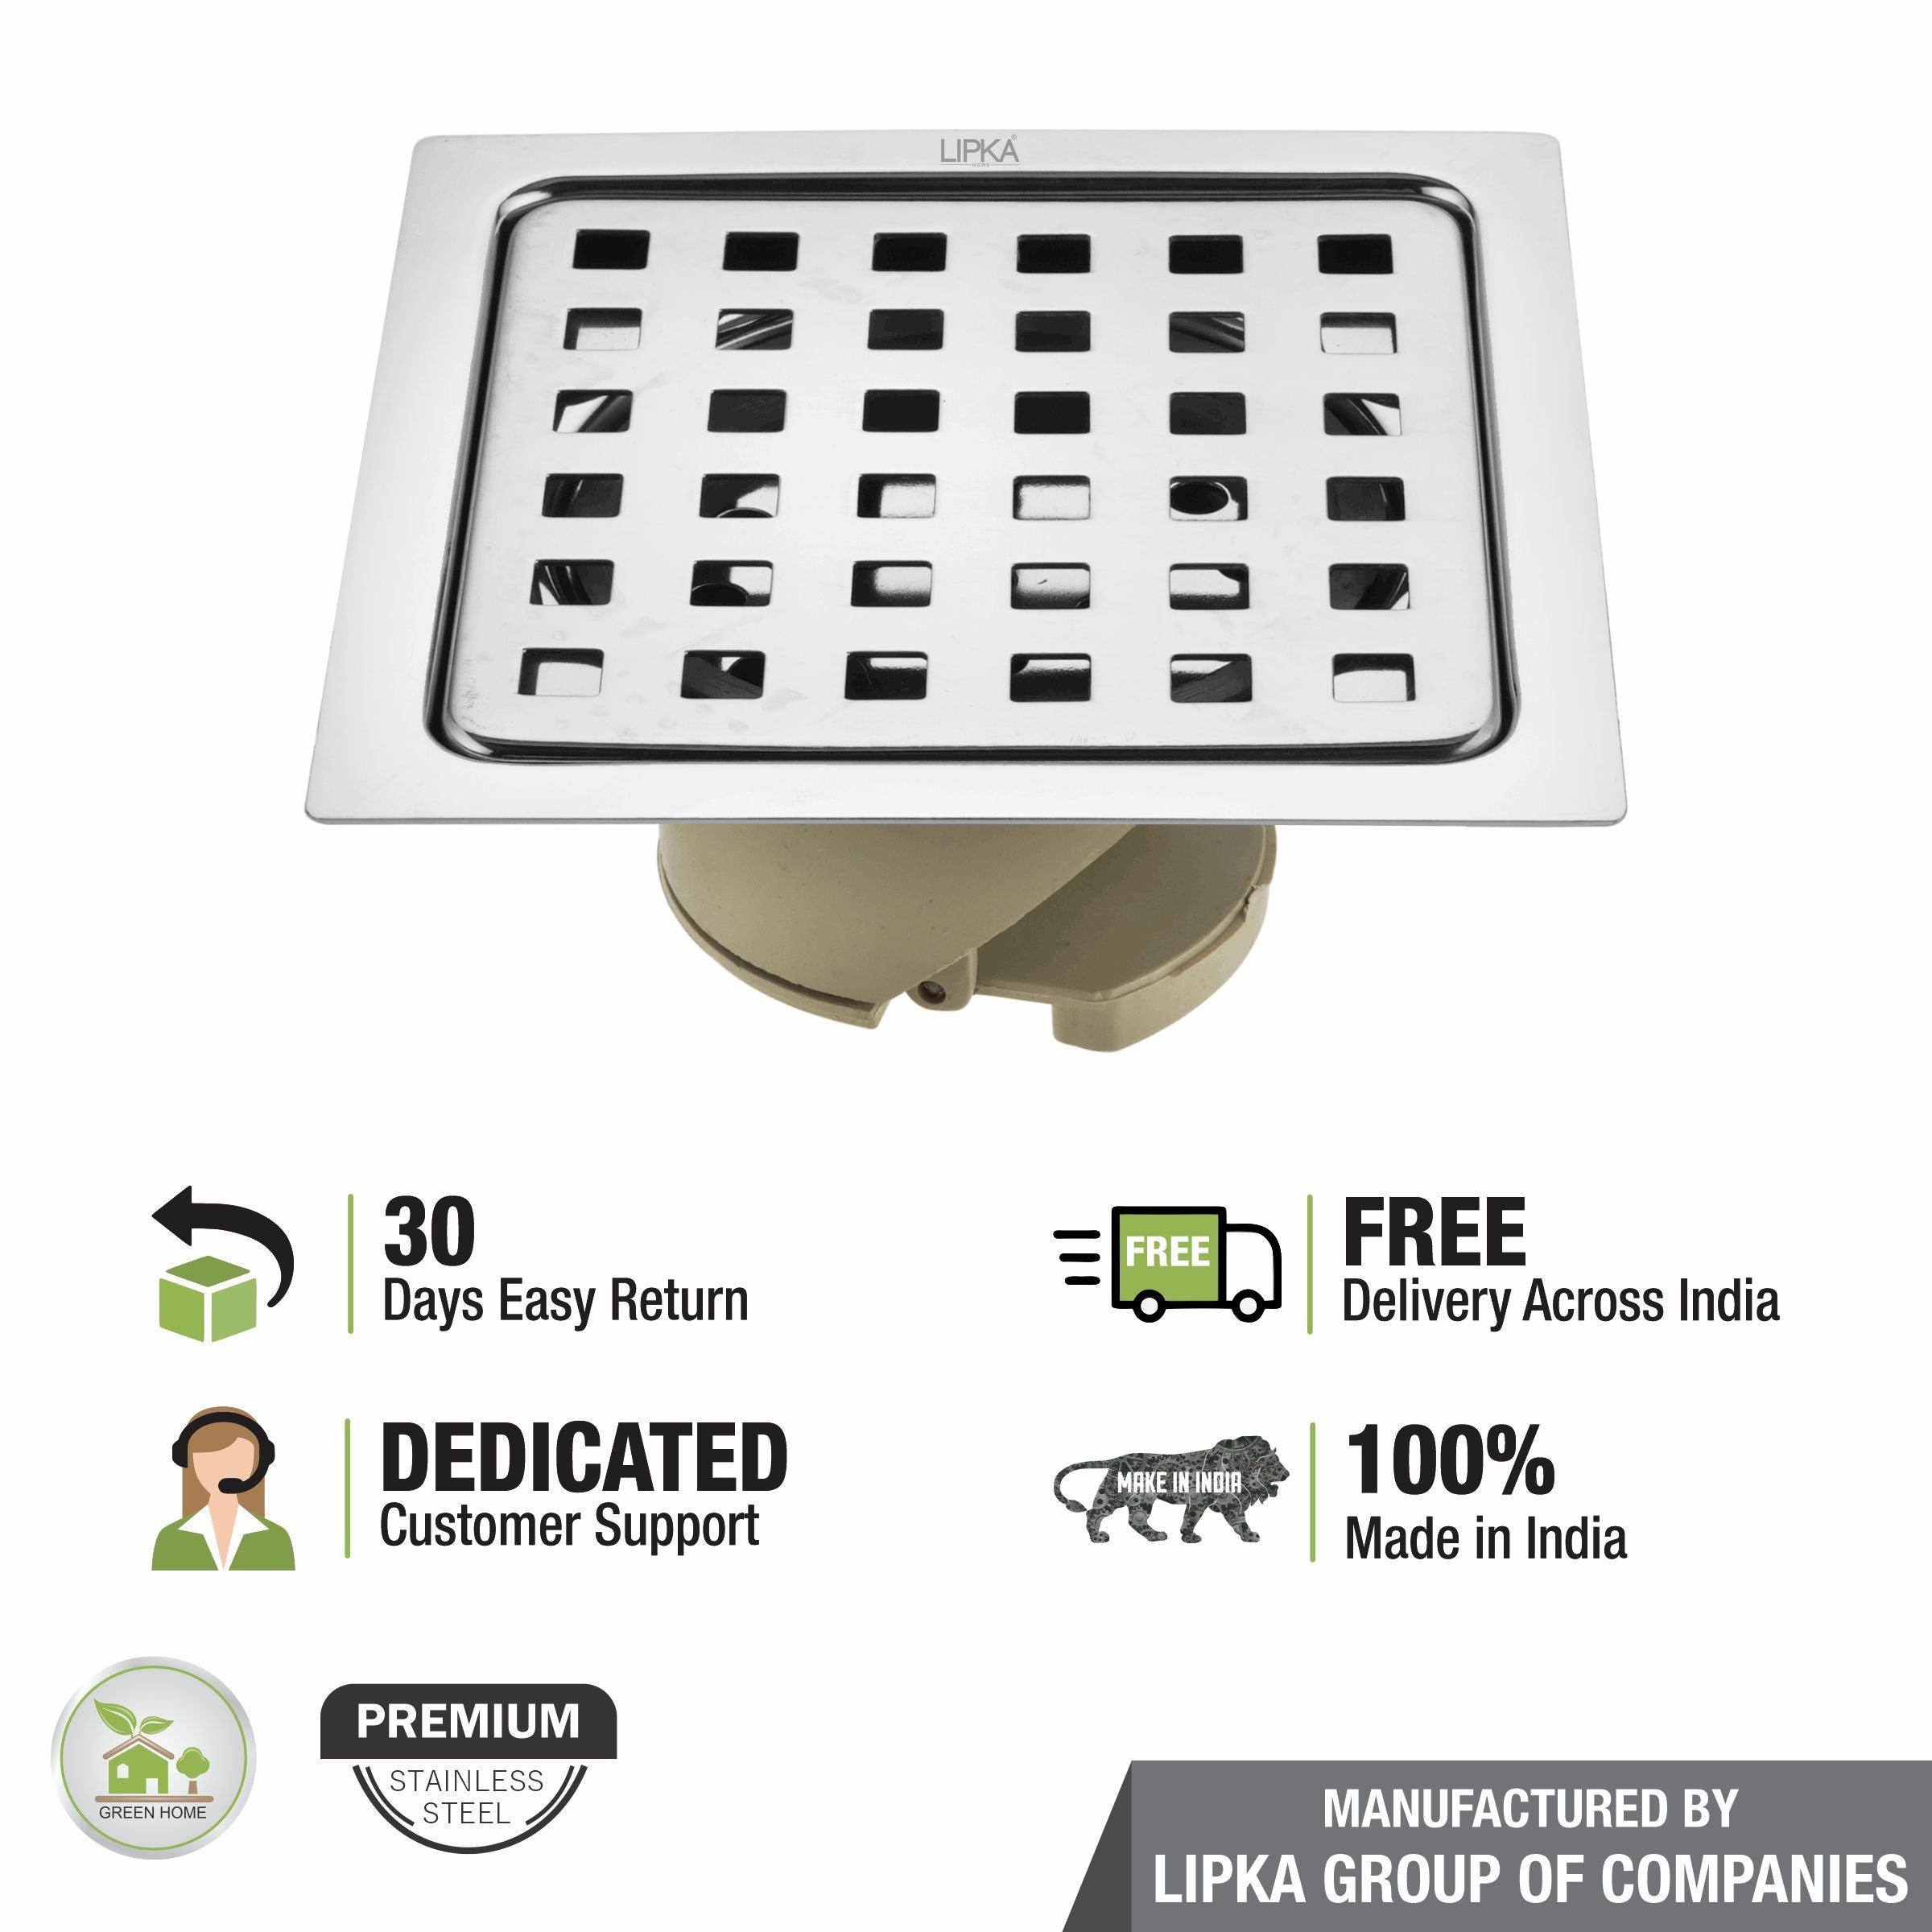 Square Jal Floor Drain (6 x 6 Inches) with Wide PVC Cockroach Trap - LIPKA - Lipka Home